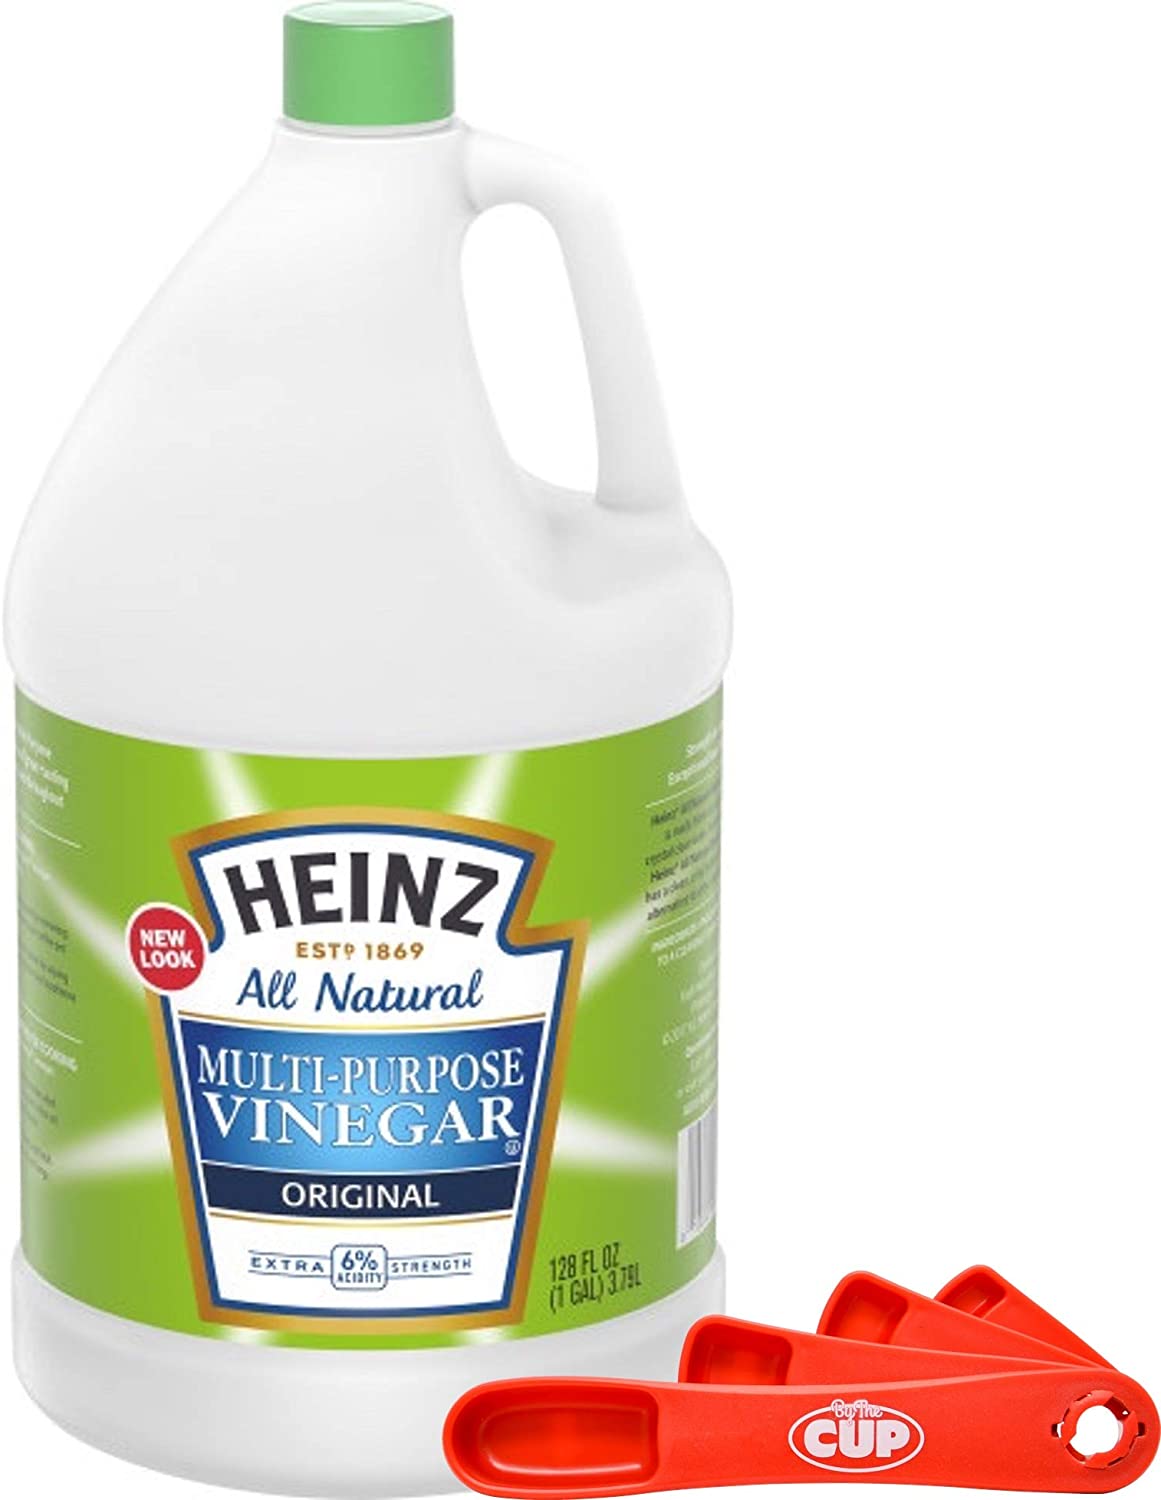 Heinz All Natural Multi-Purpose Vinegar, 6% Acidity, 1 Gallon Bottle (Pack of 1) with By The Cup Swivel Spoons